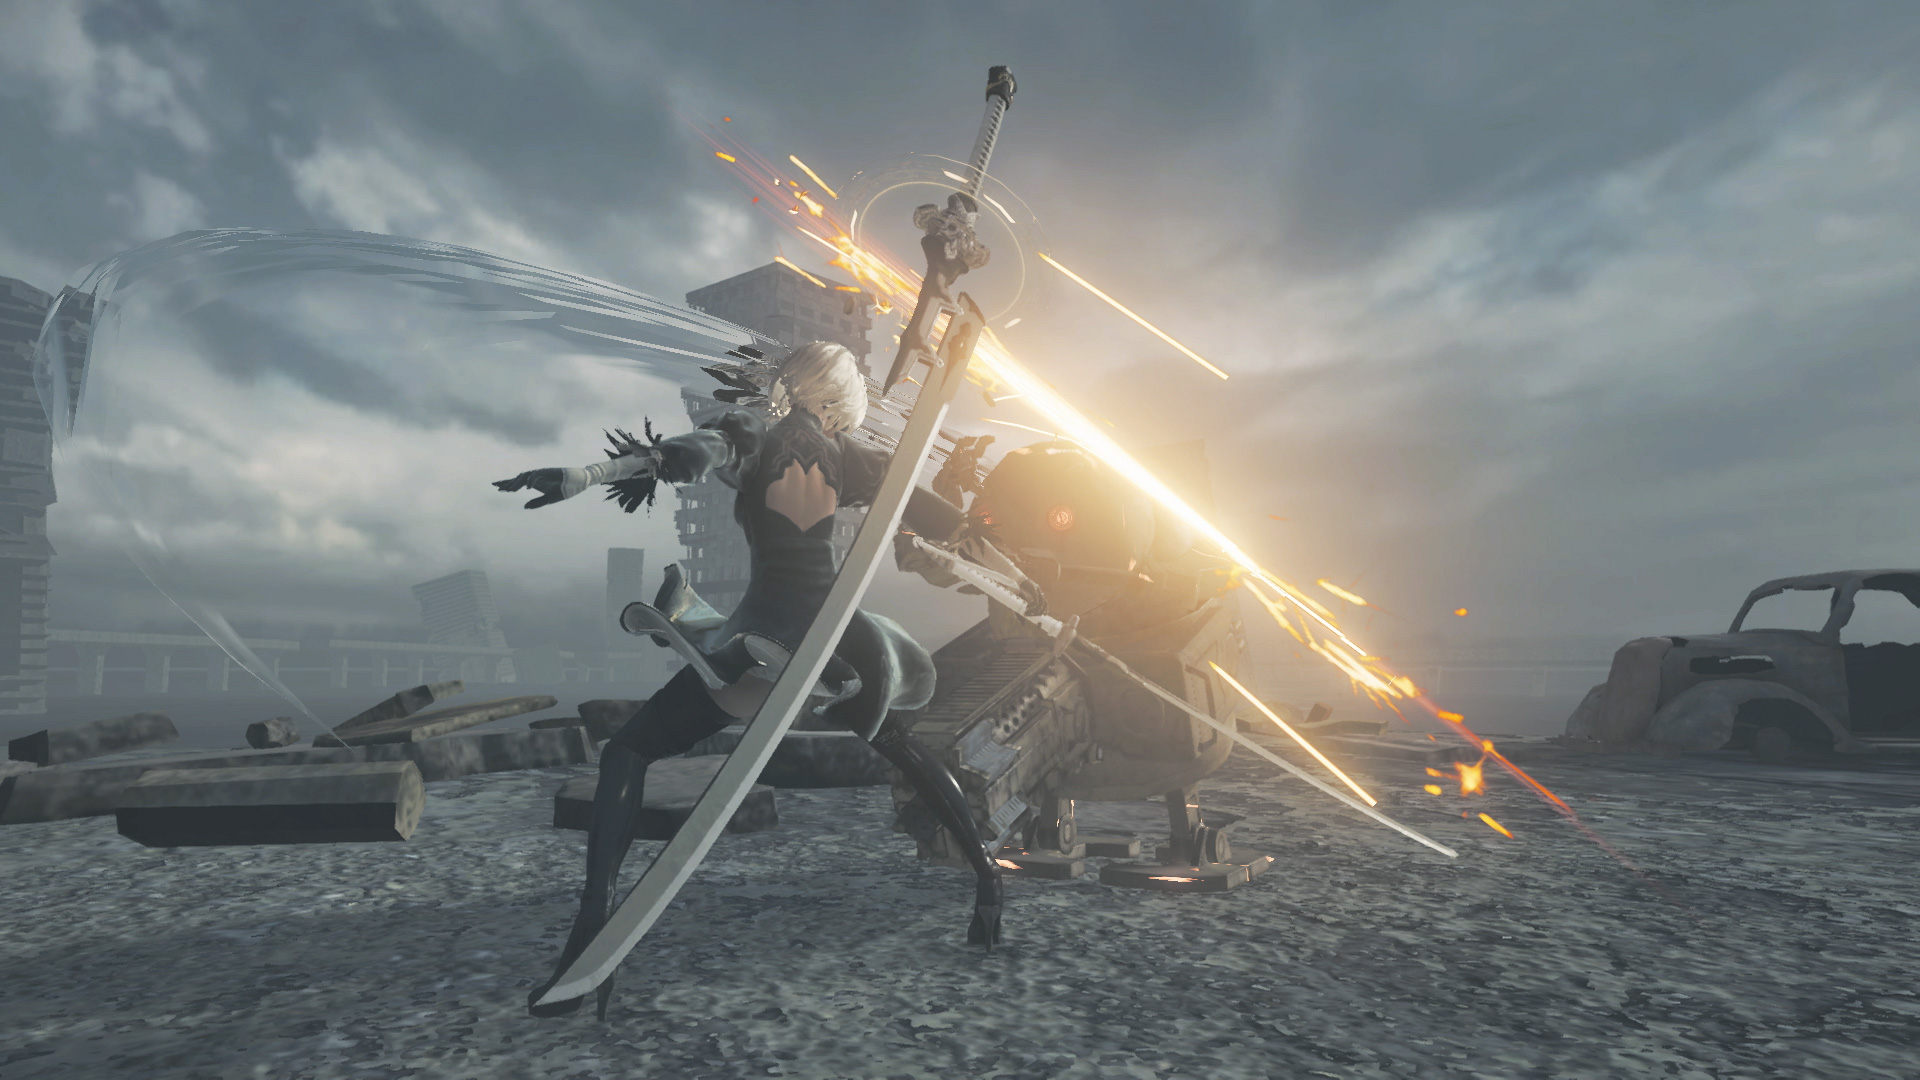 NieR Series Will Continue, but a New Game isn’t in Development Yet – Producer